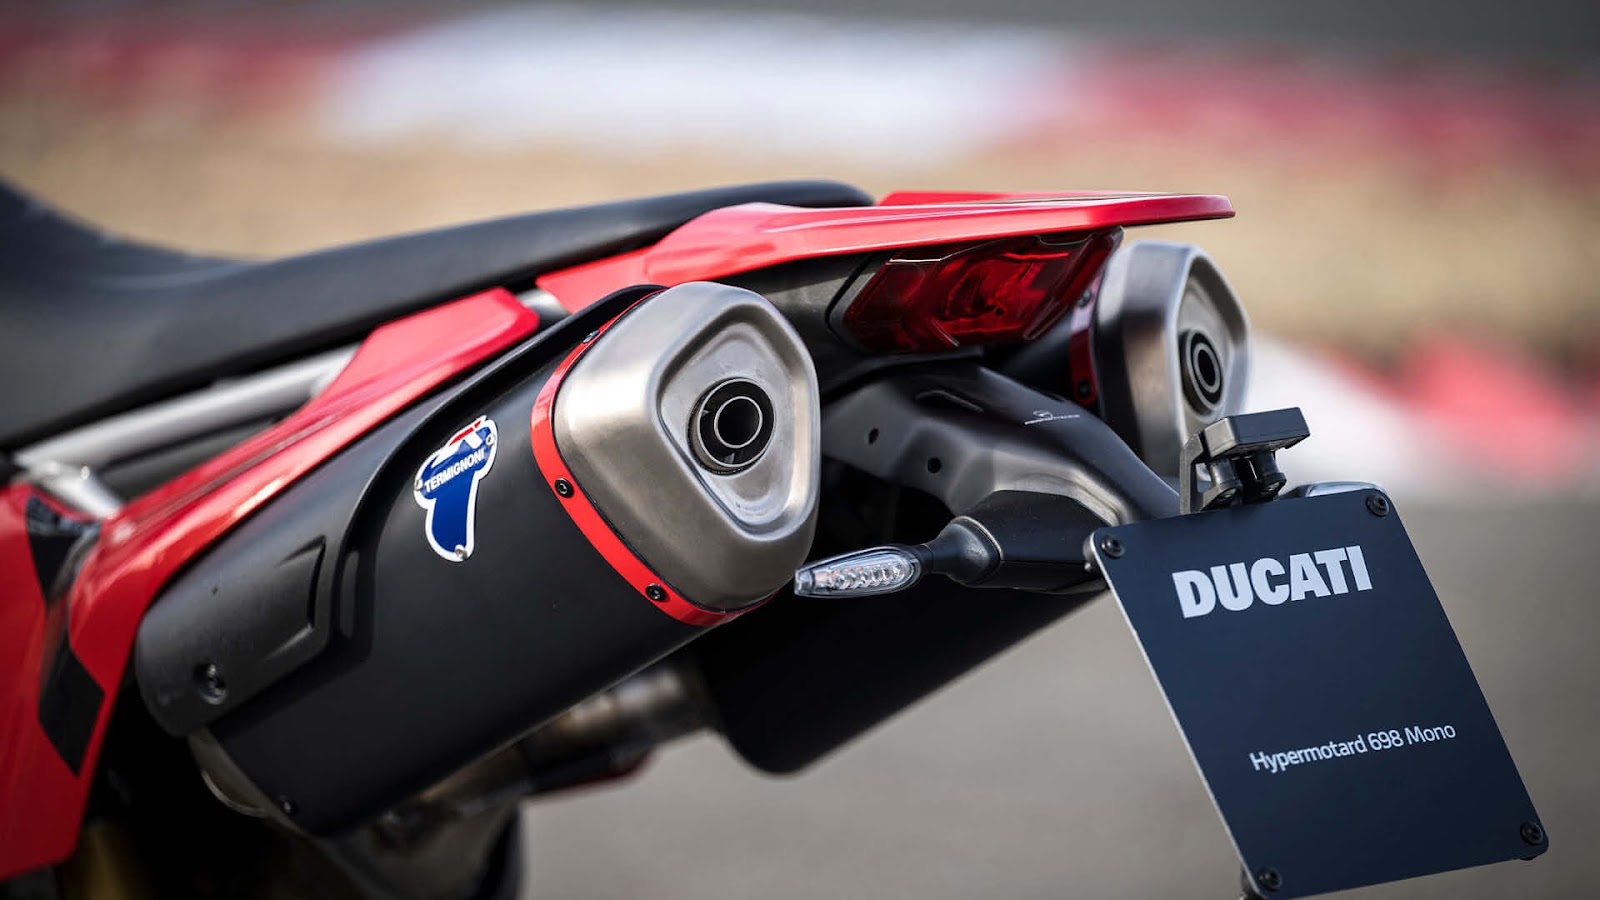 This Termignoni exhaust system significantly transforms (for the better) the behavior of this Hypermotard, in terms of performance and sensations in terms of sound.